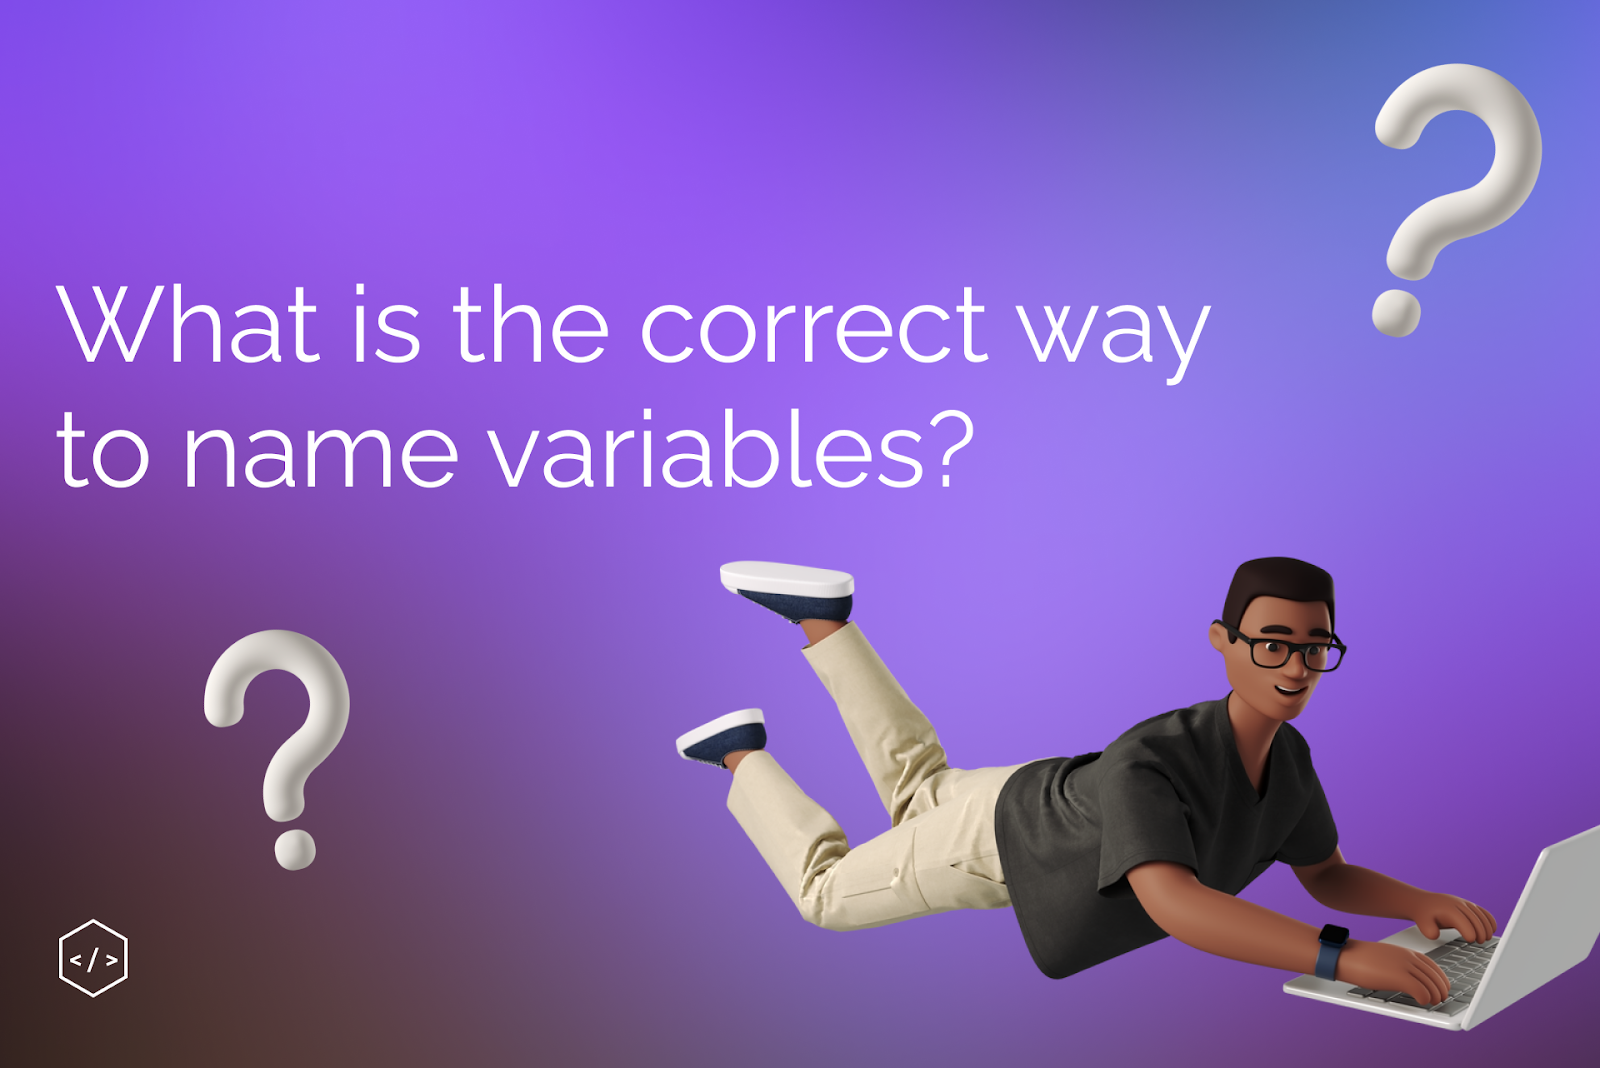 6 rules to name variables correctly